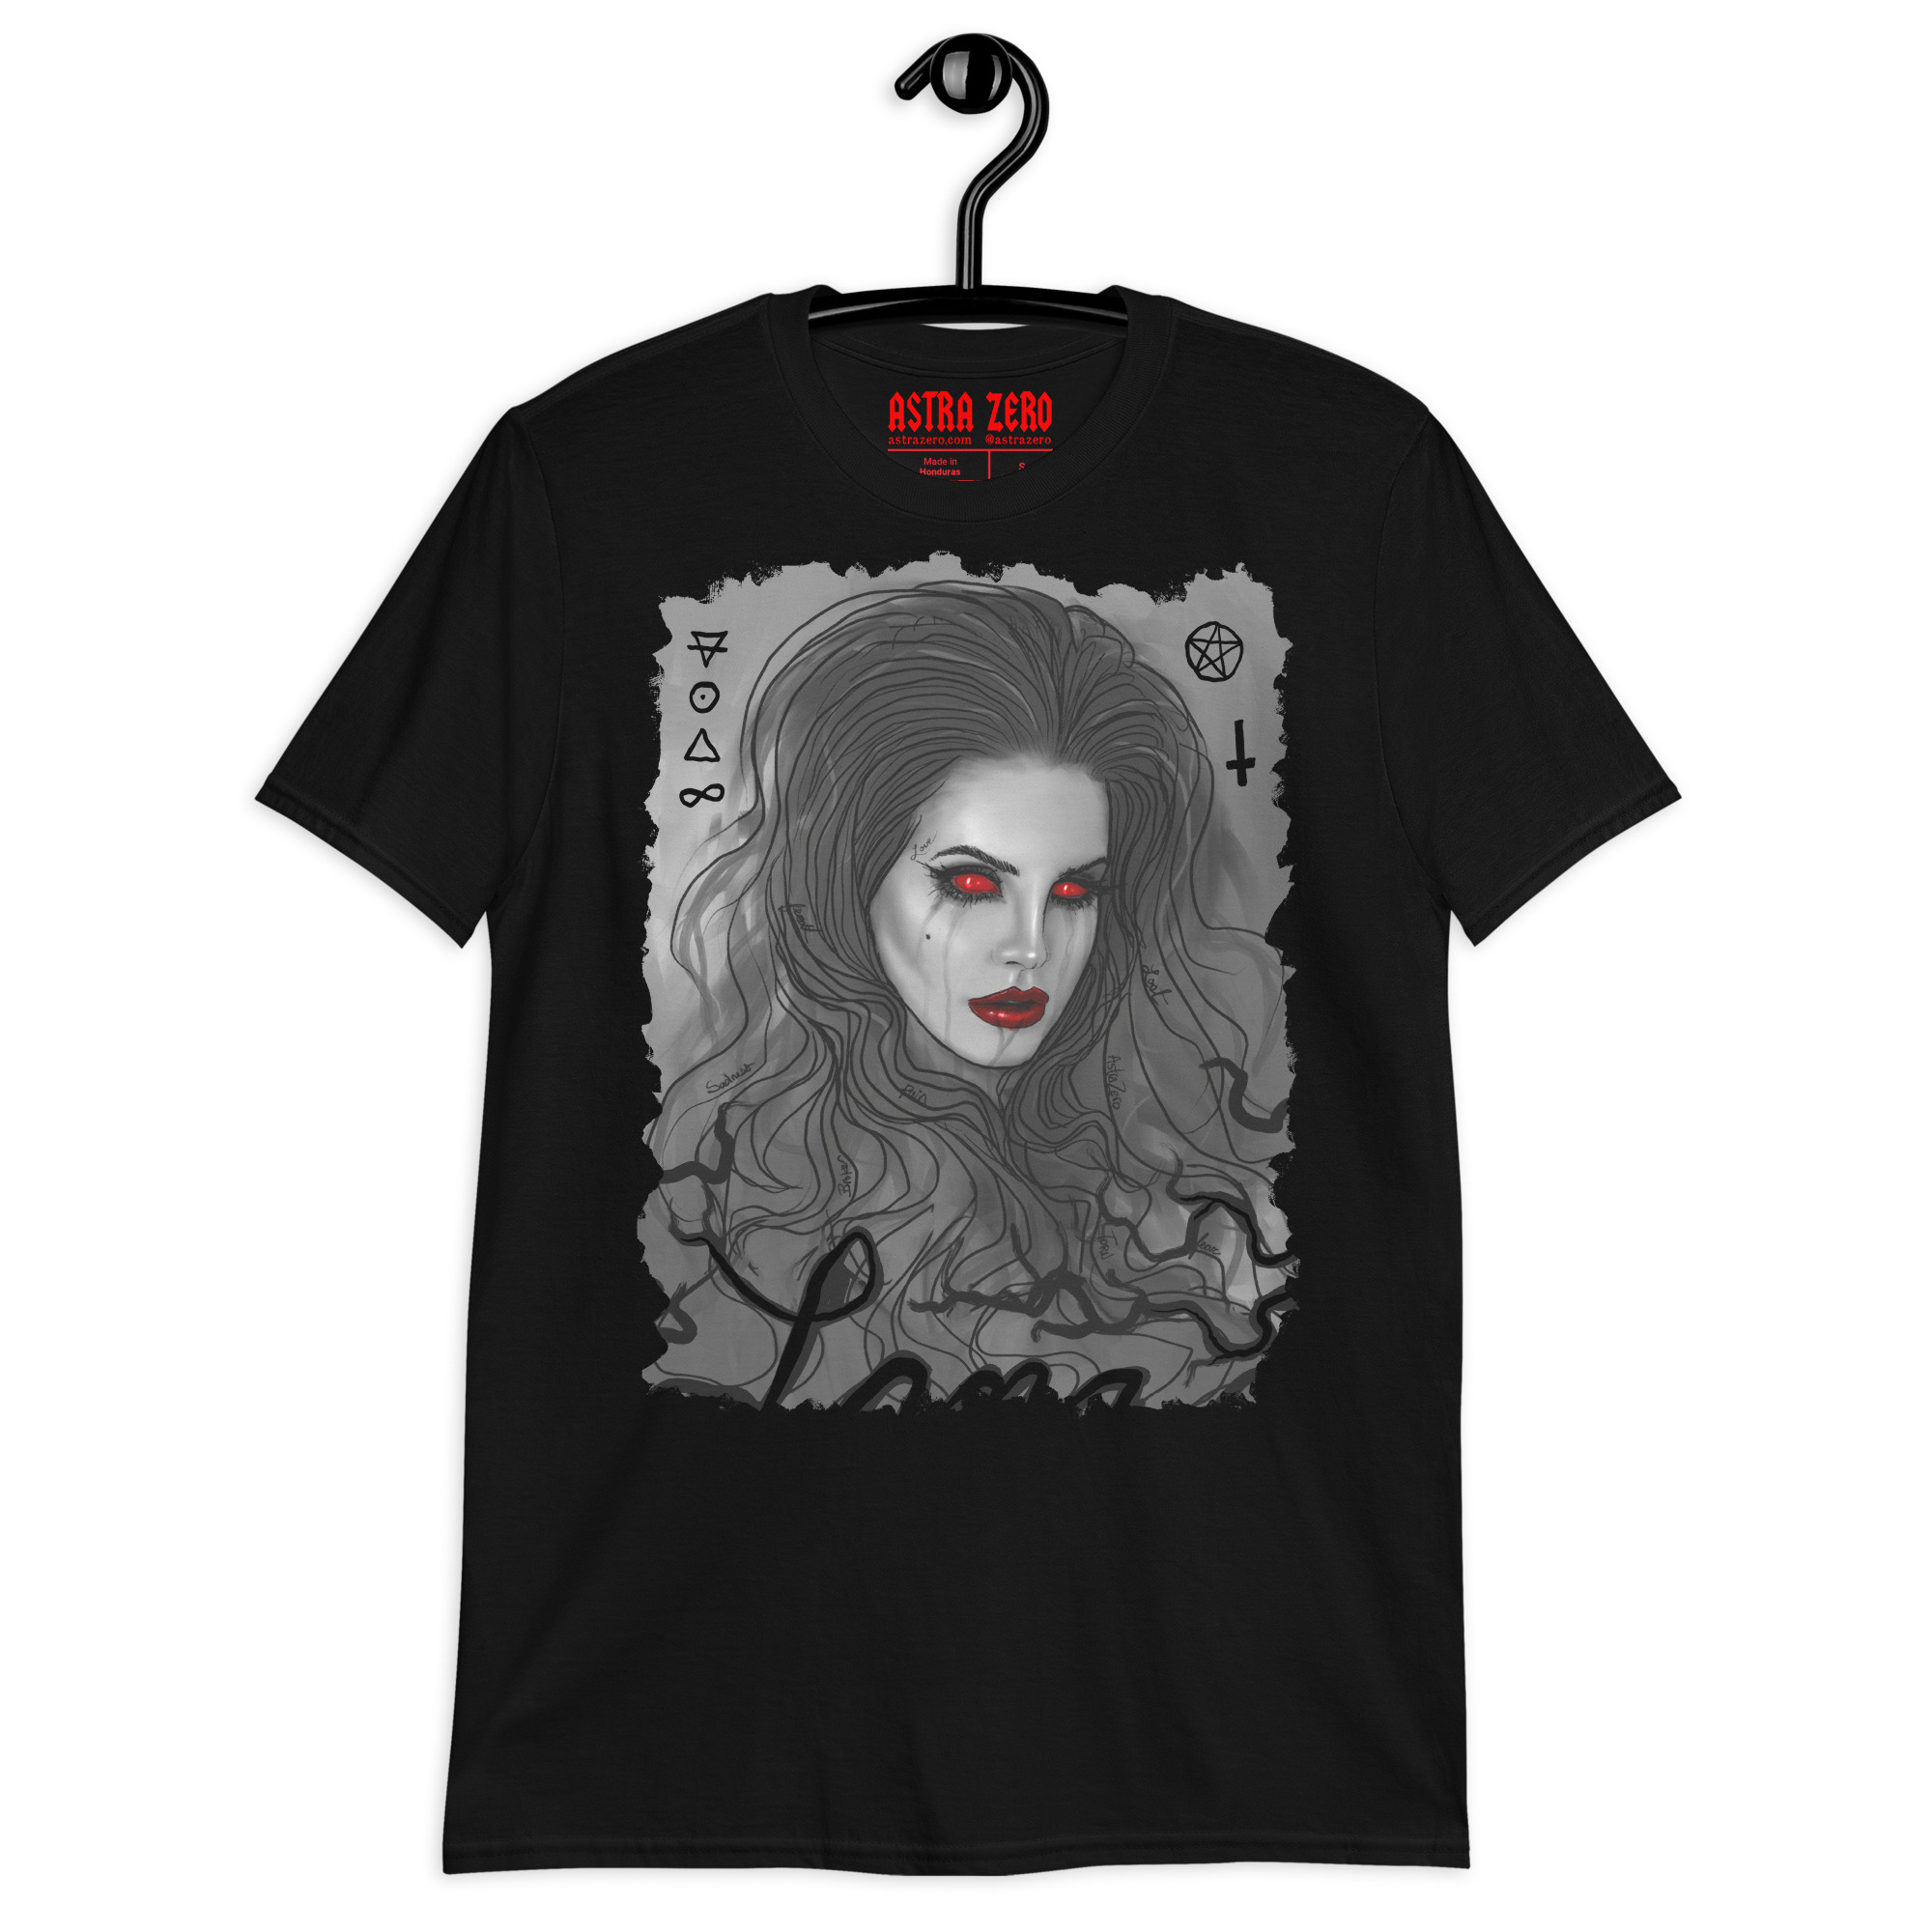 Featured image for “Lana Witch - Short-Sleeve Unisex T-Shirt”